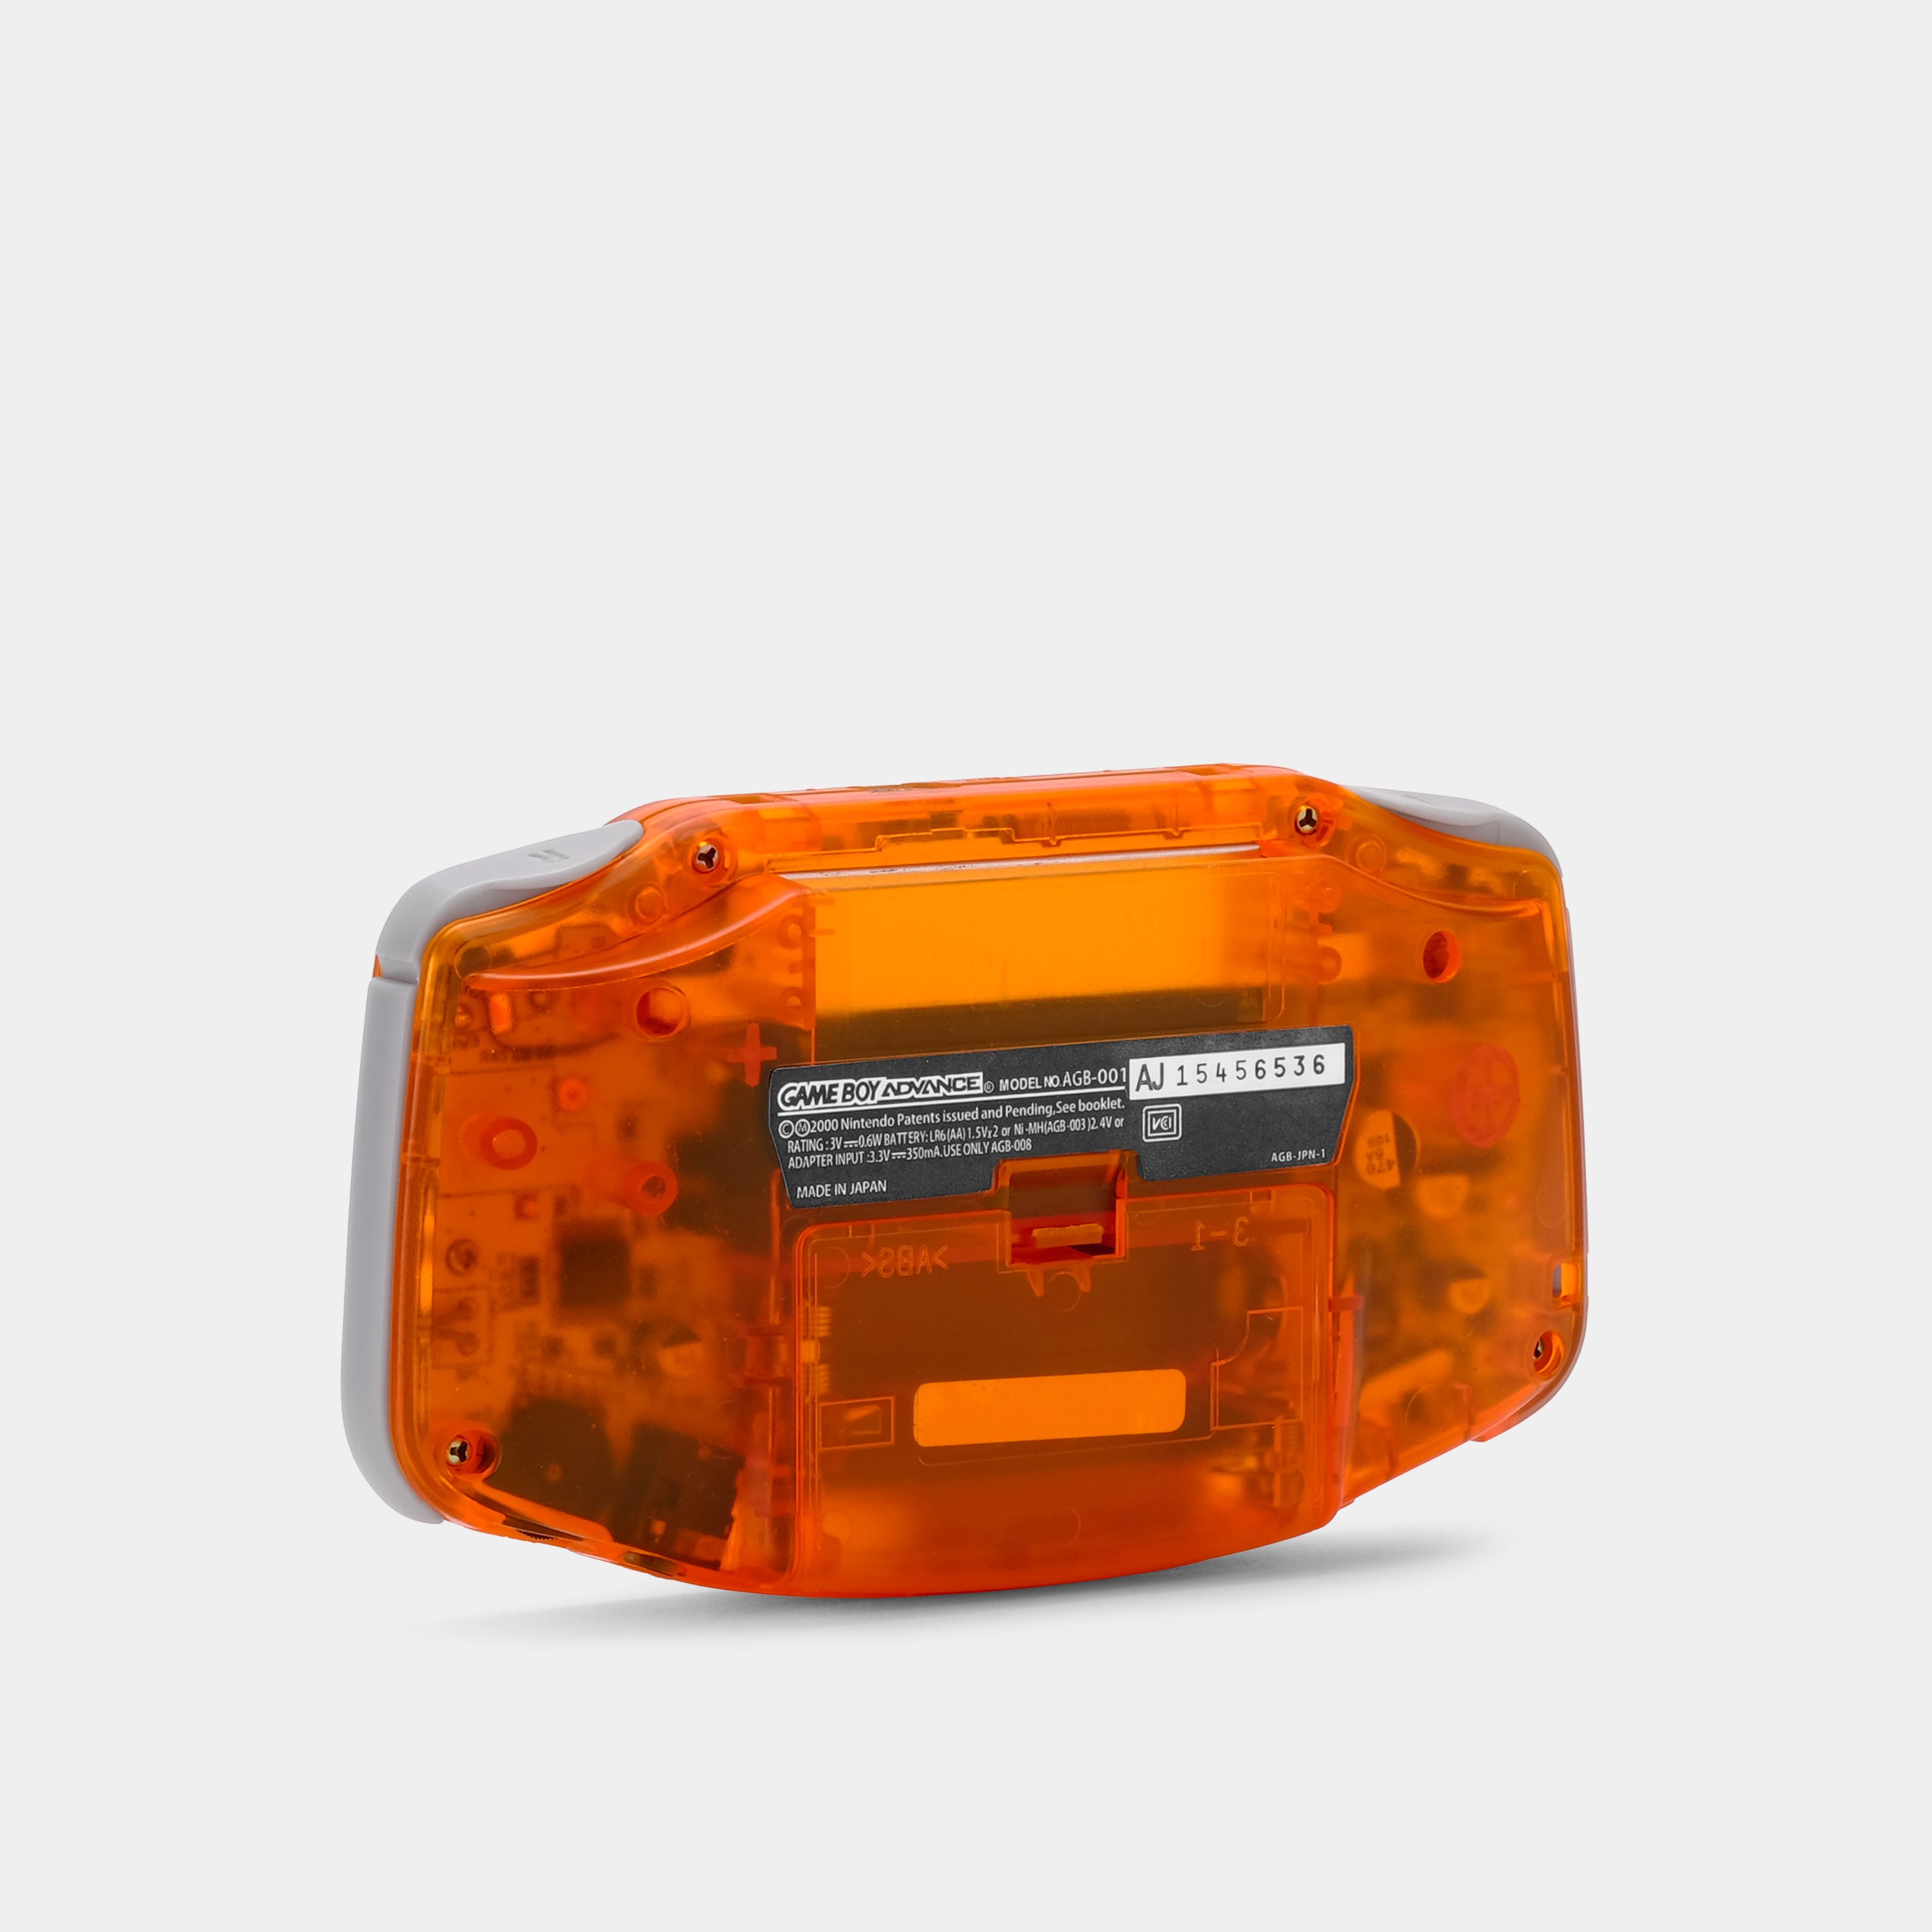 Nintendo Game Boy Advance Transparent Orange Game Console With Backlit Screen